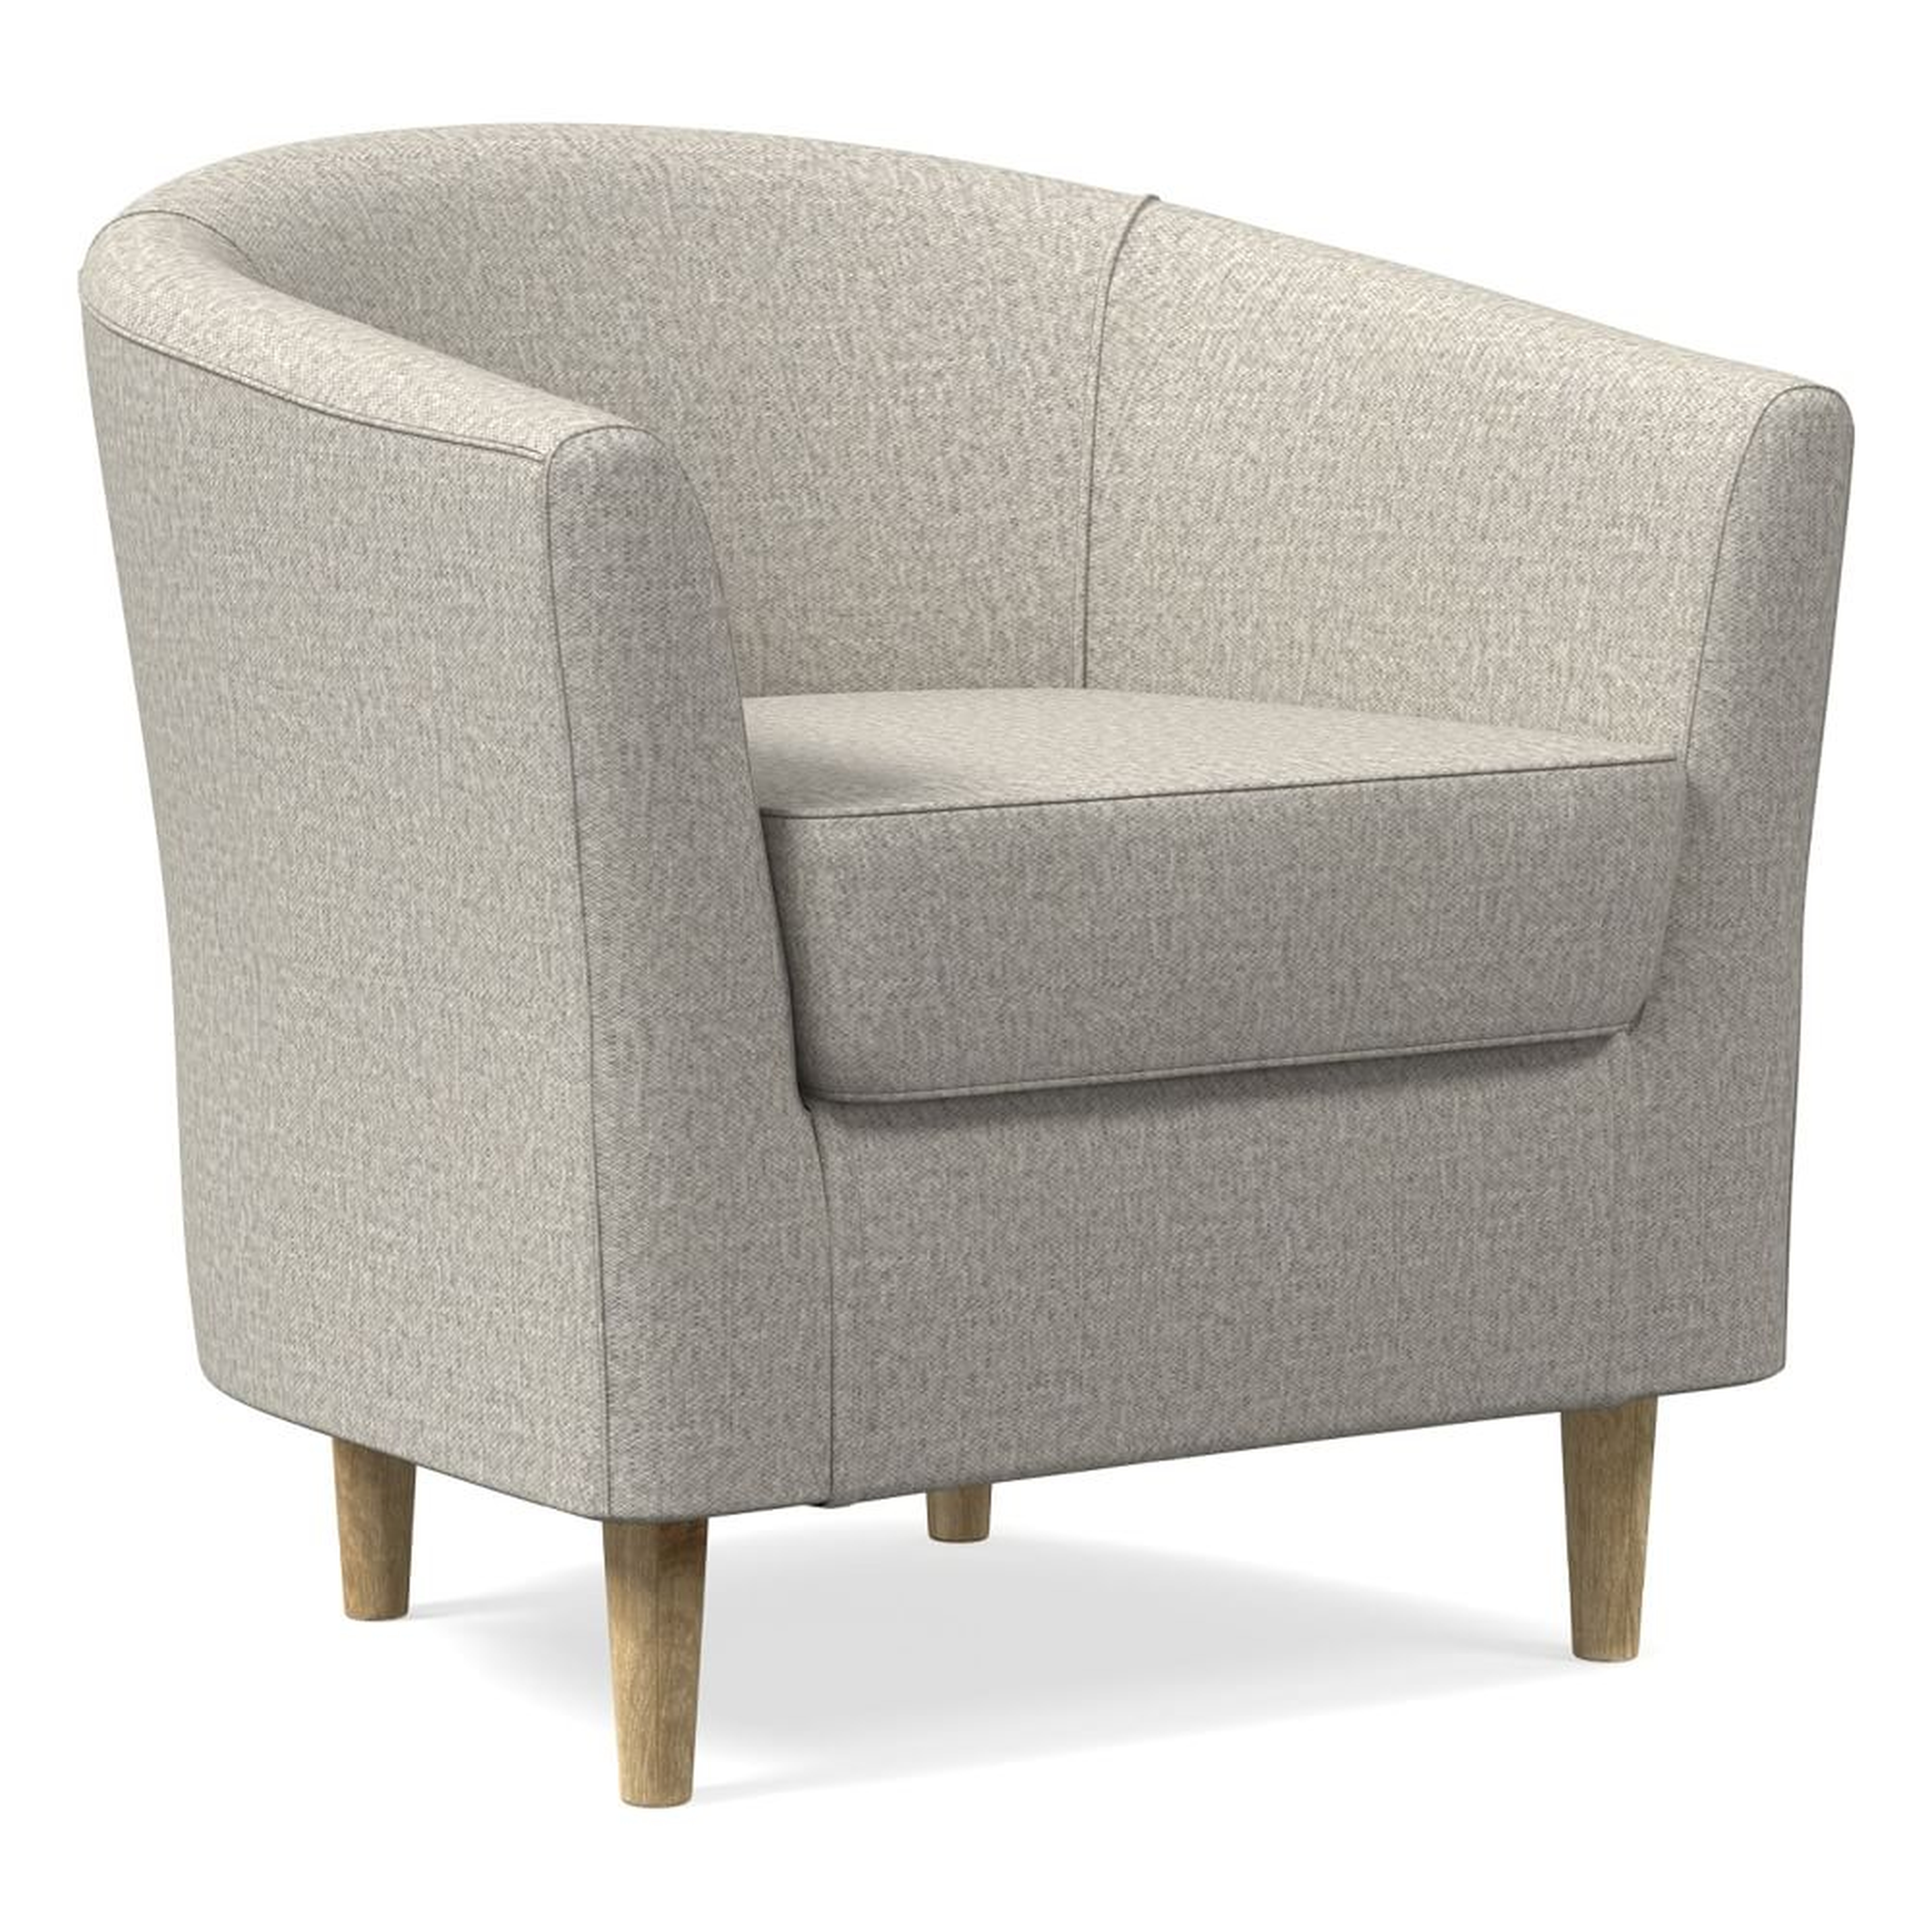 Mila Chair, Poly, Twill, Dove, Soft Wheat - West Elm